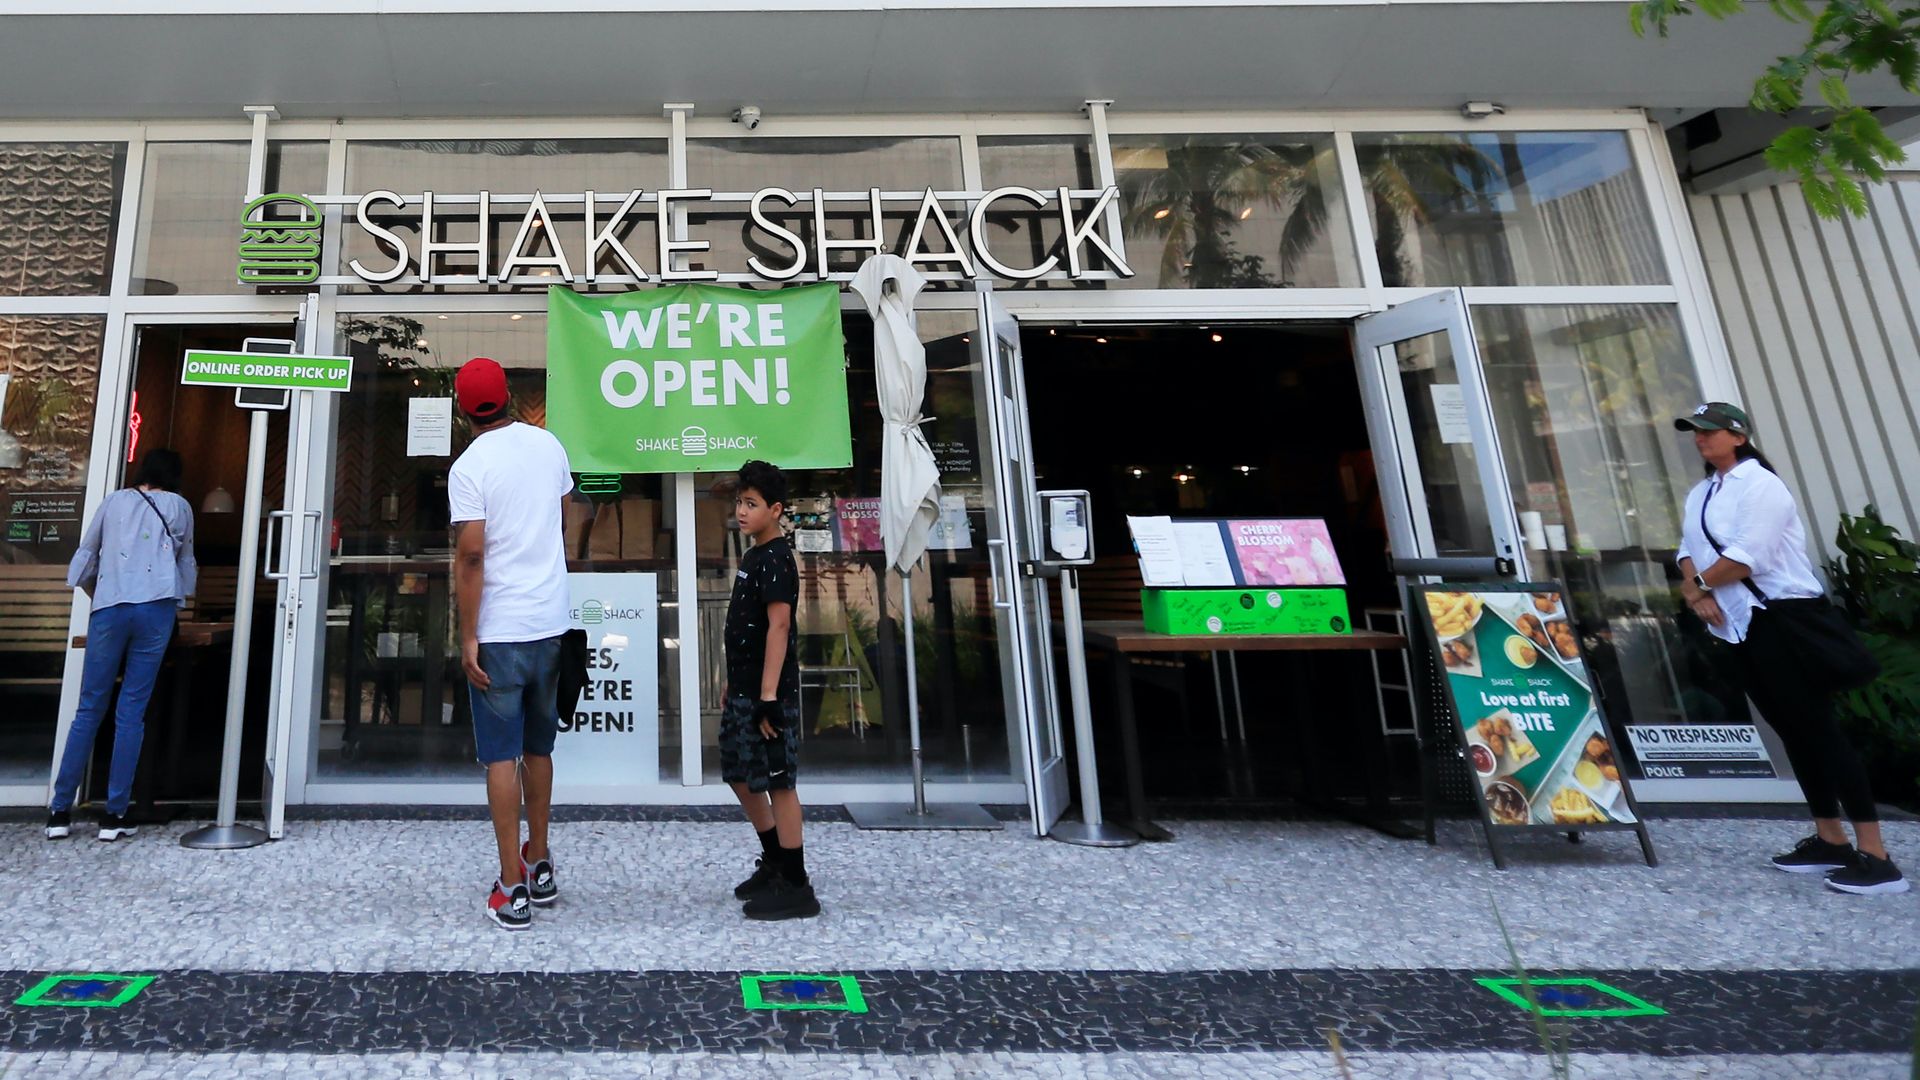  Customers wait for to-go orders outside Shake Shack in South Beach on April 19, 2020 in Miami Beach